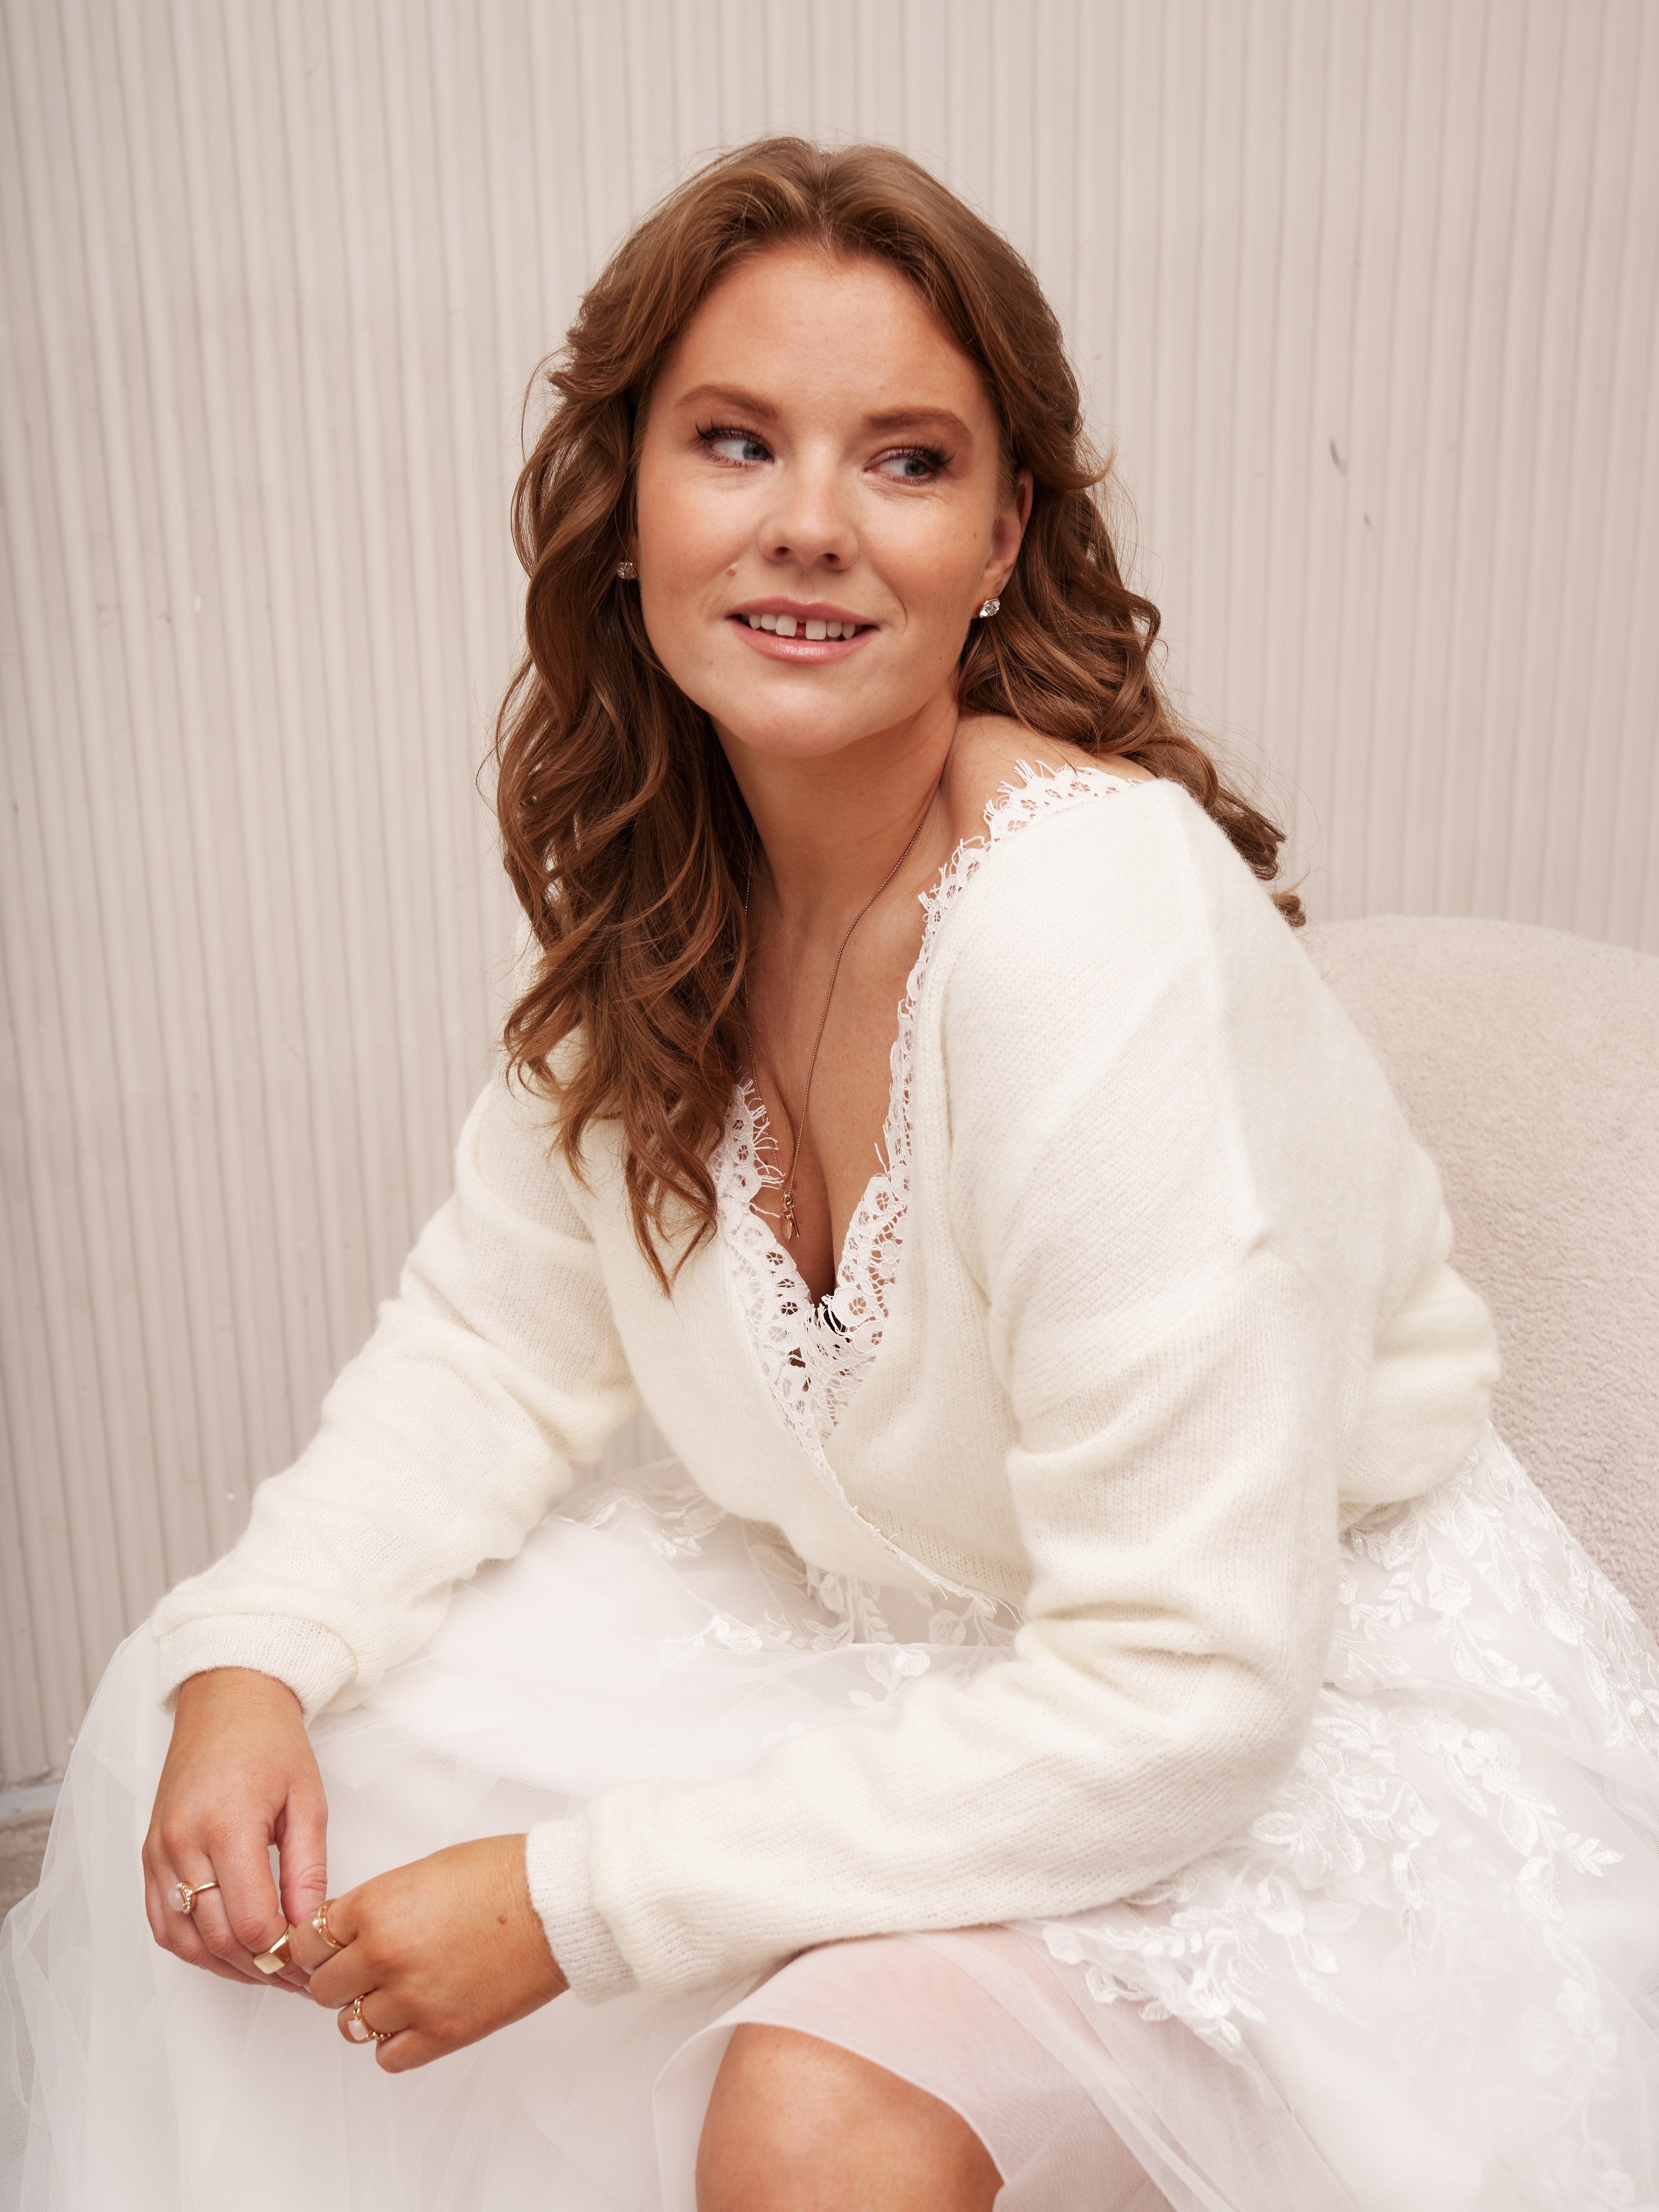 Ivory V-Neck Bridal Sweater Adorned with Lace Trim